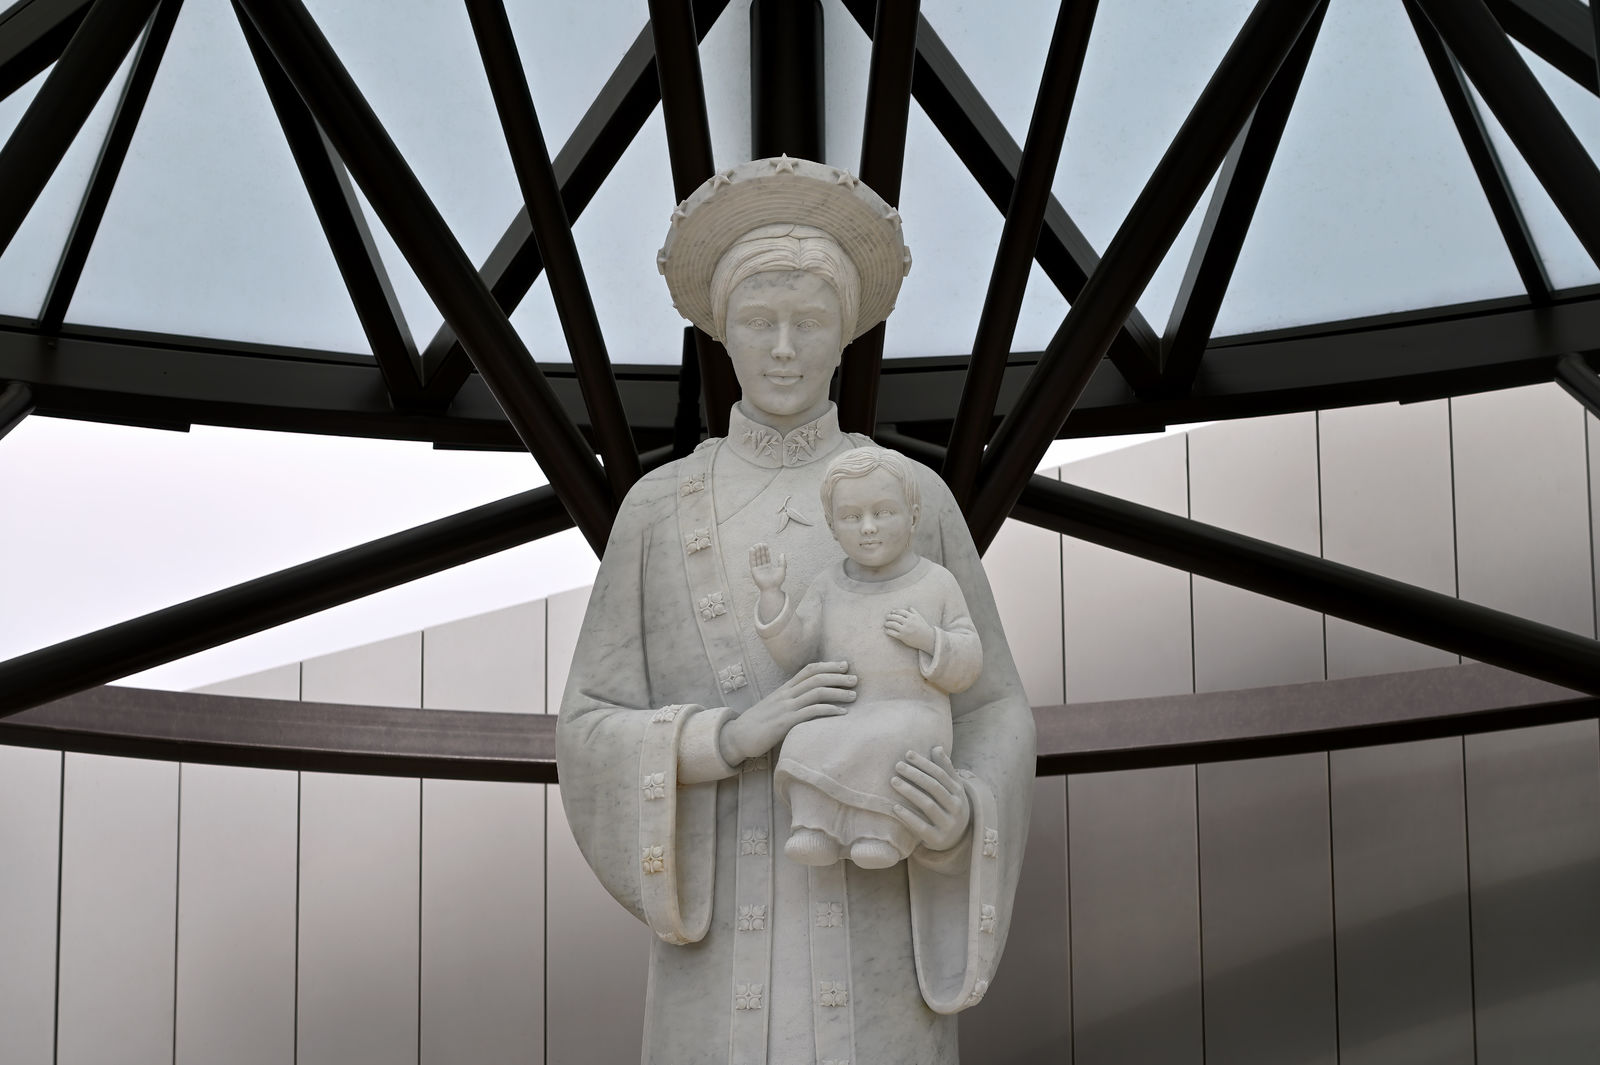 The Our Lady of La Vang statue depicts the Virgin Mary, with Baby Jesus in her arms, as they are believed to have appeared in a 1798 Marian apparition in Vietnam. The Diocese of Orange and Christ Cathedral unveiled the shrine before thousands of supporters during an elaborate July 17 solemn blessing day that included a Mass, processional and live entertainment. Photo courtesy Diocese of Orange.